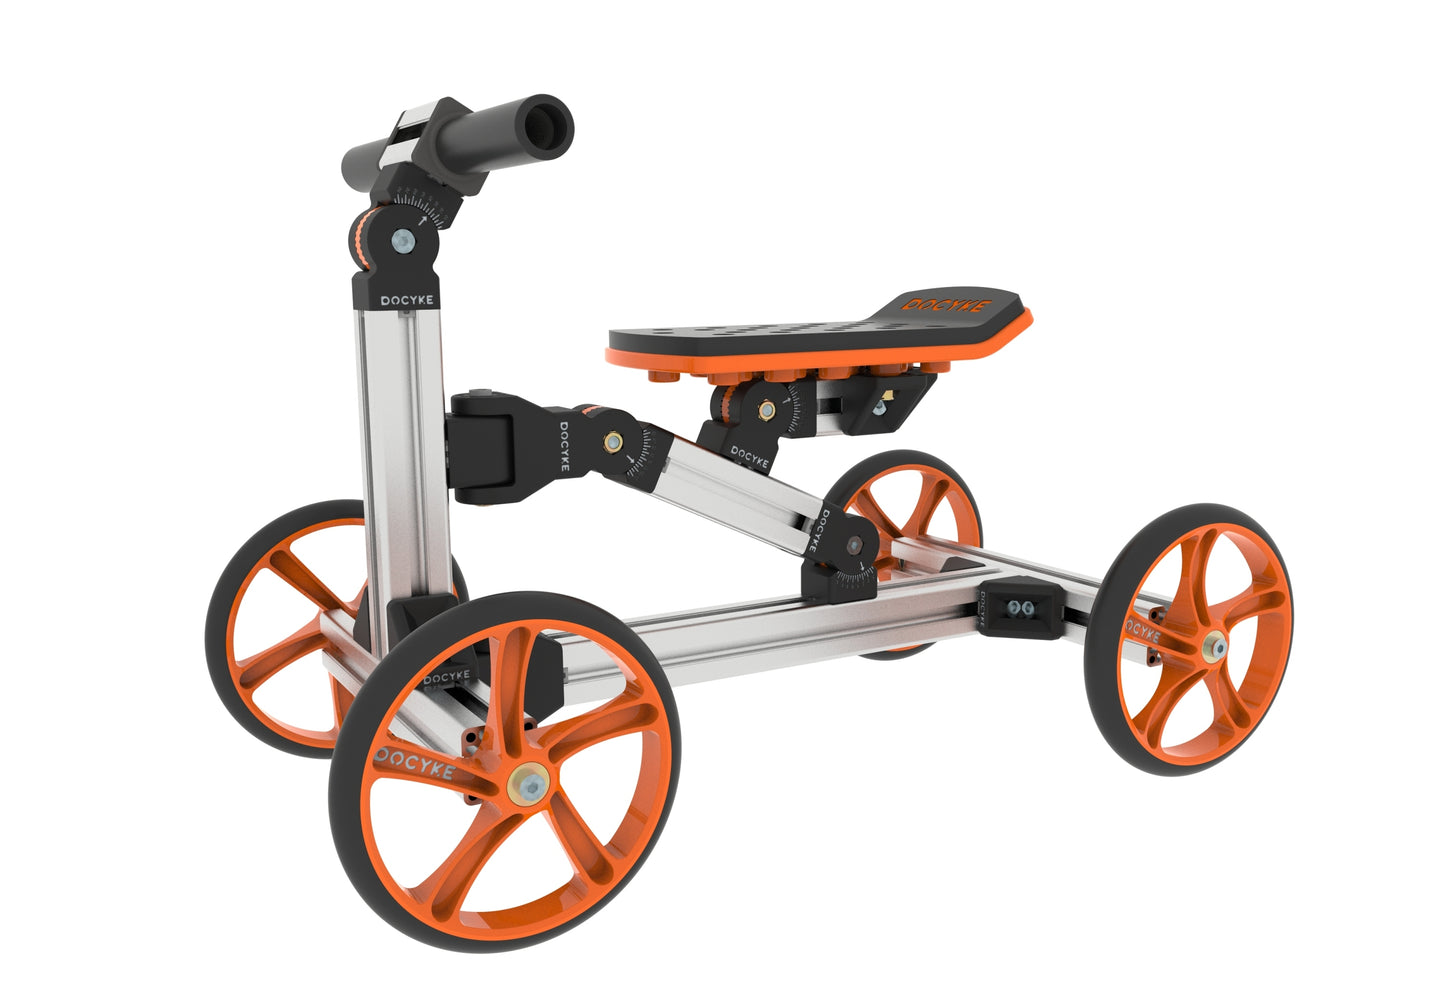 KidRock Buildable Kit 20 in 1 Kids Balance Bike No Pedal Toy for 1 to 6 Years Construction Construction Kit Kids Sit/Stand Scooter Most Popular M Kit (Non Electric)